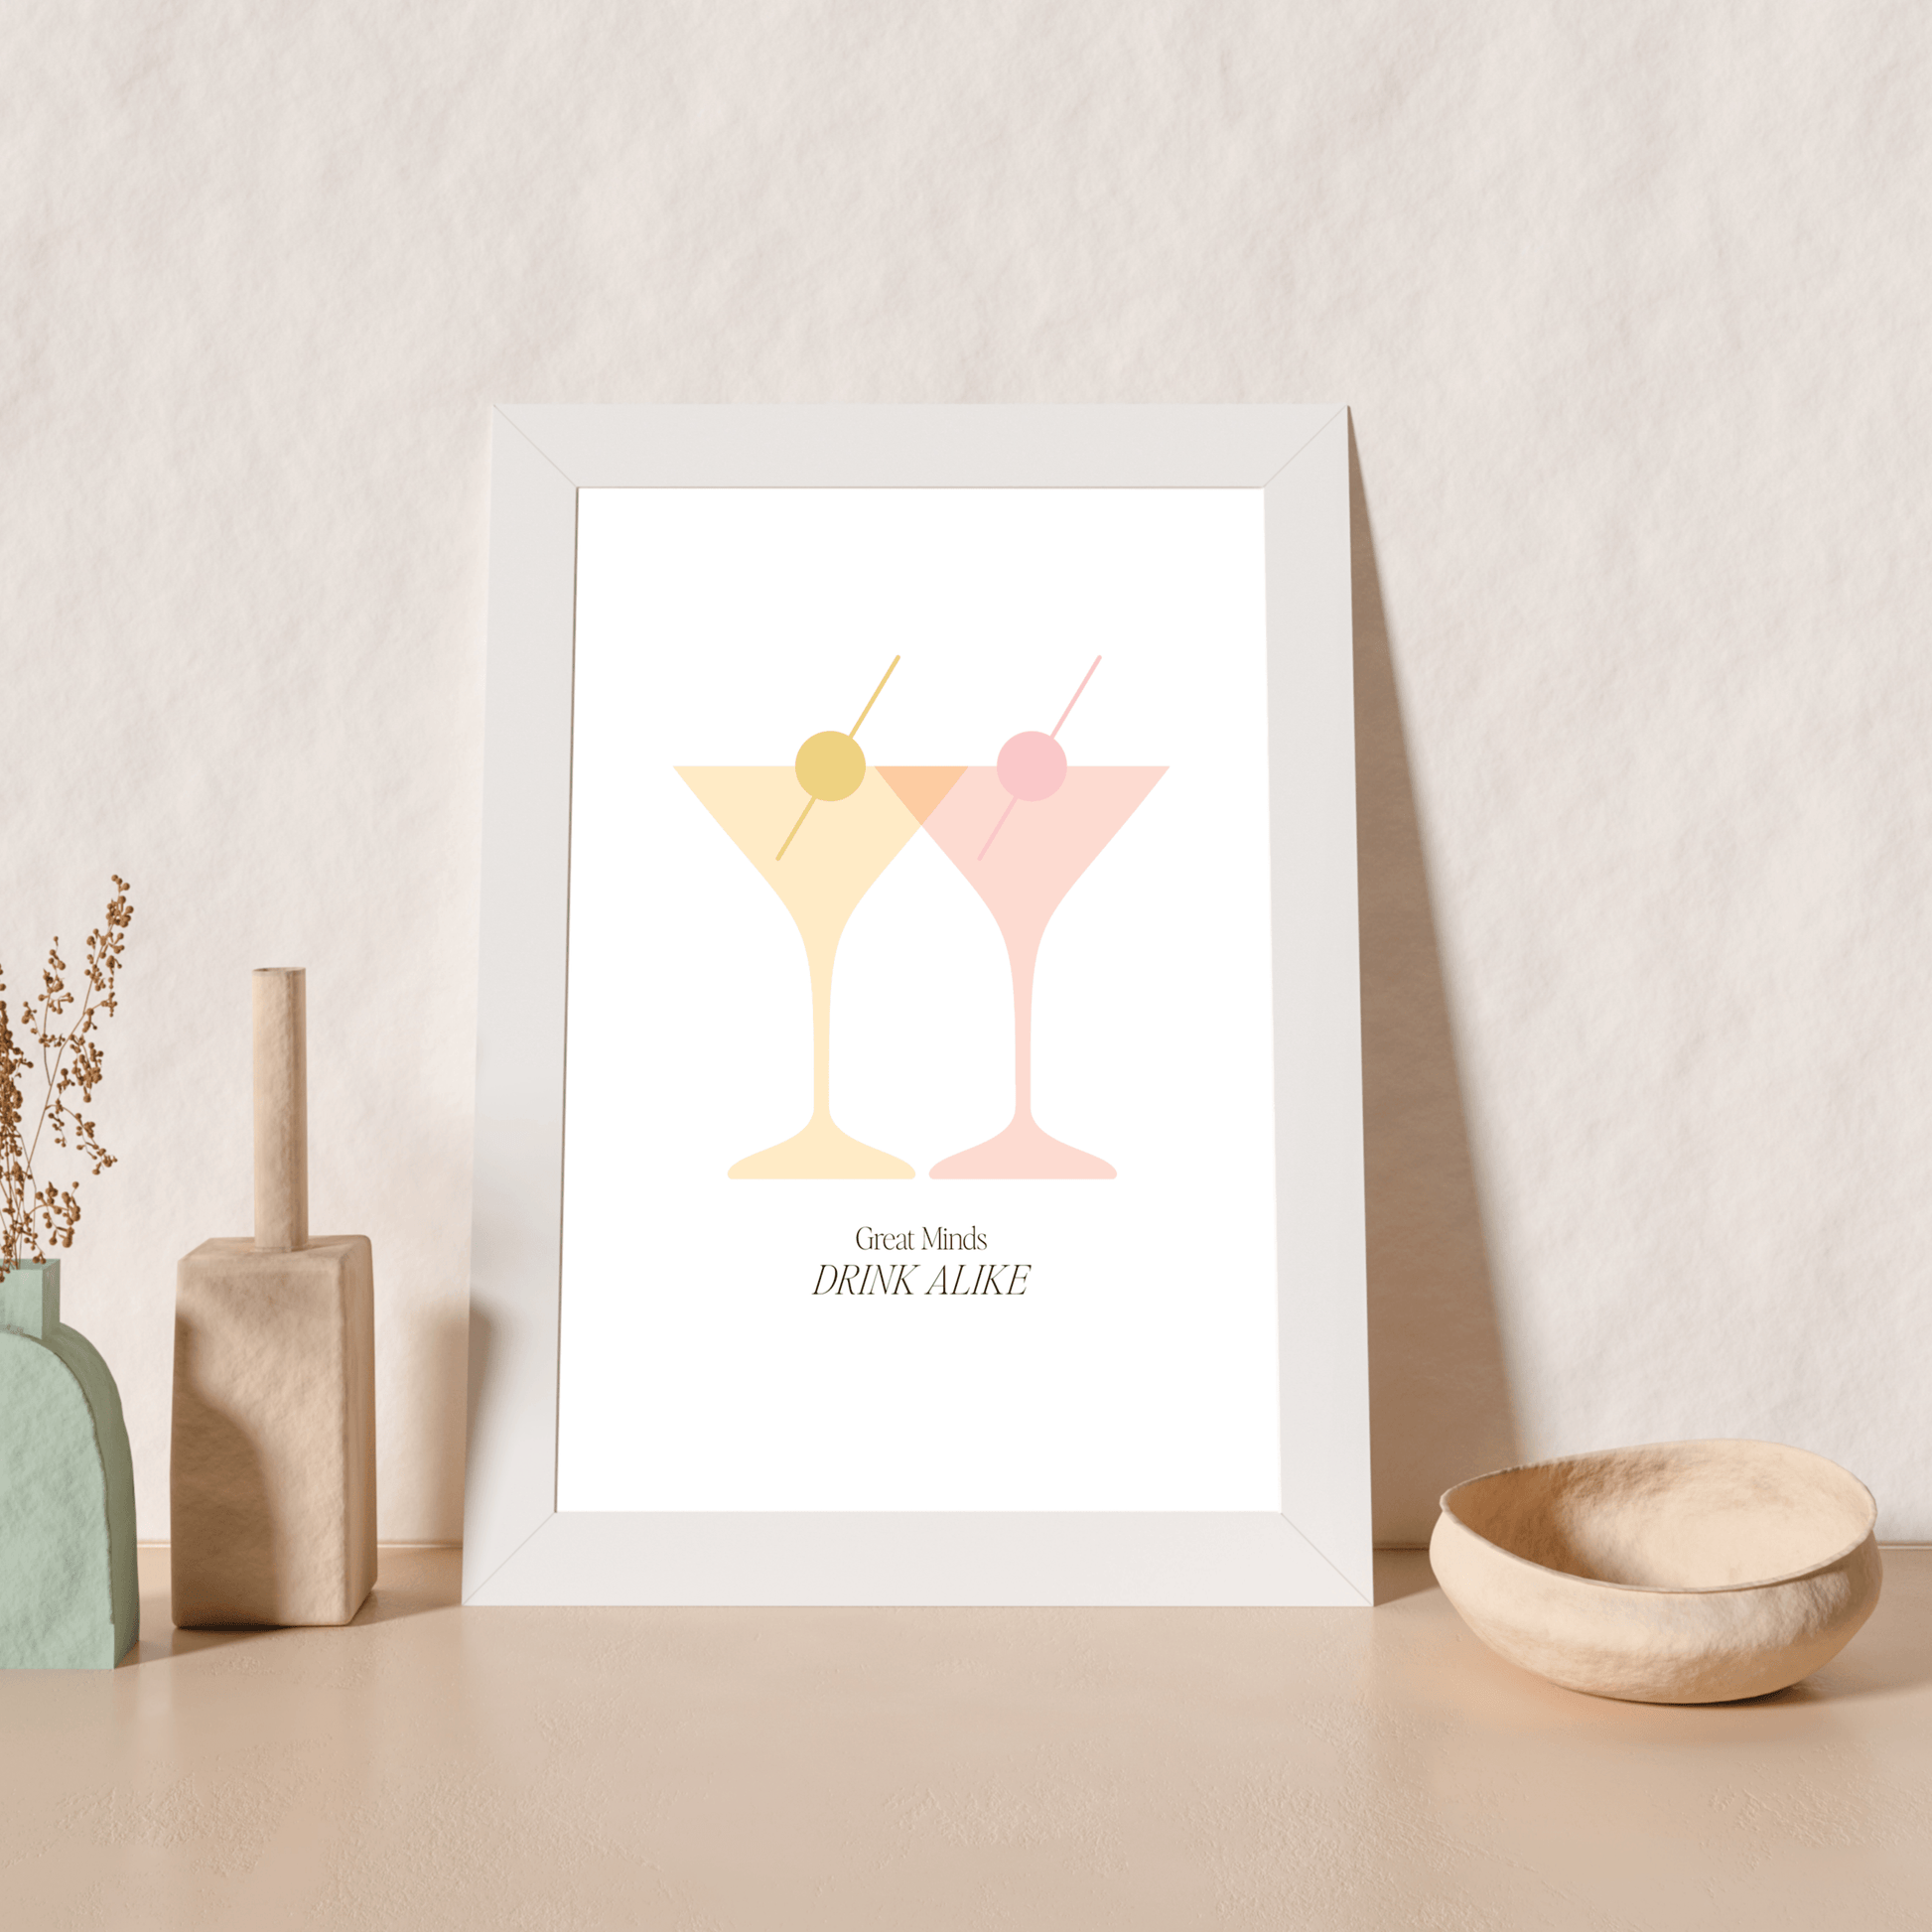 Great Minds Drink Alike, Poster - THE WALL SNOB